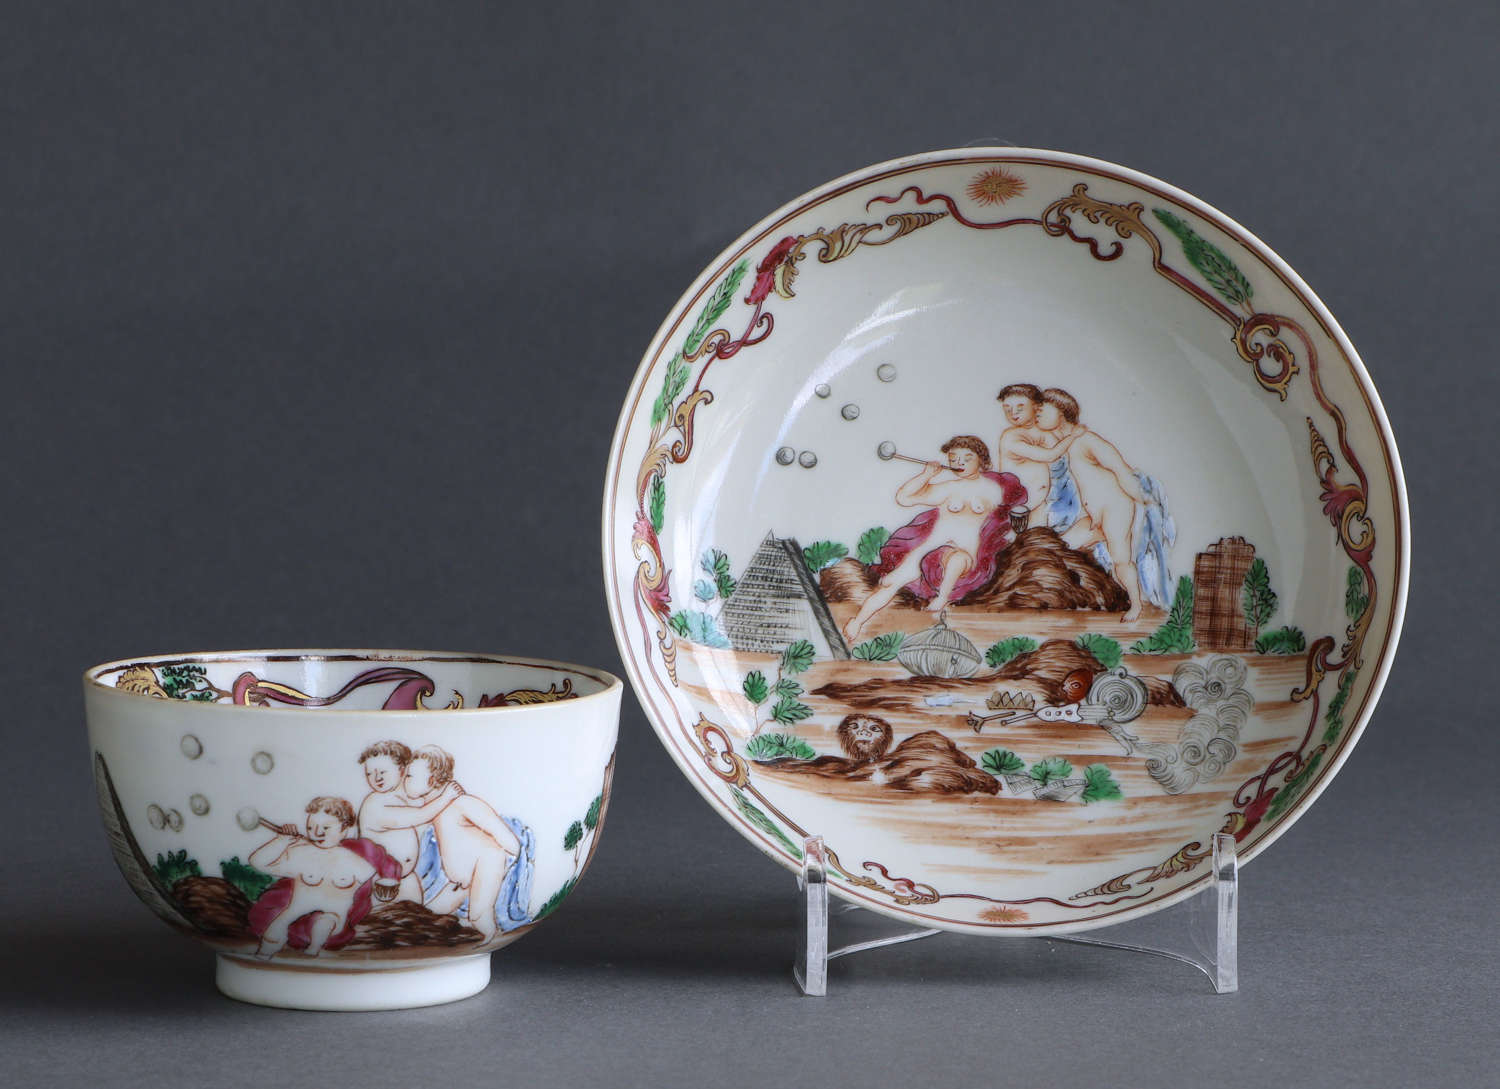 A rare Chinese export cup & saucer with European scene decoration